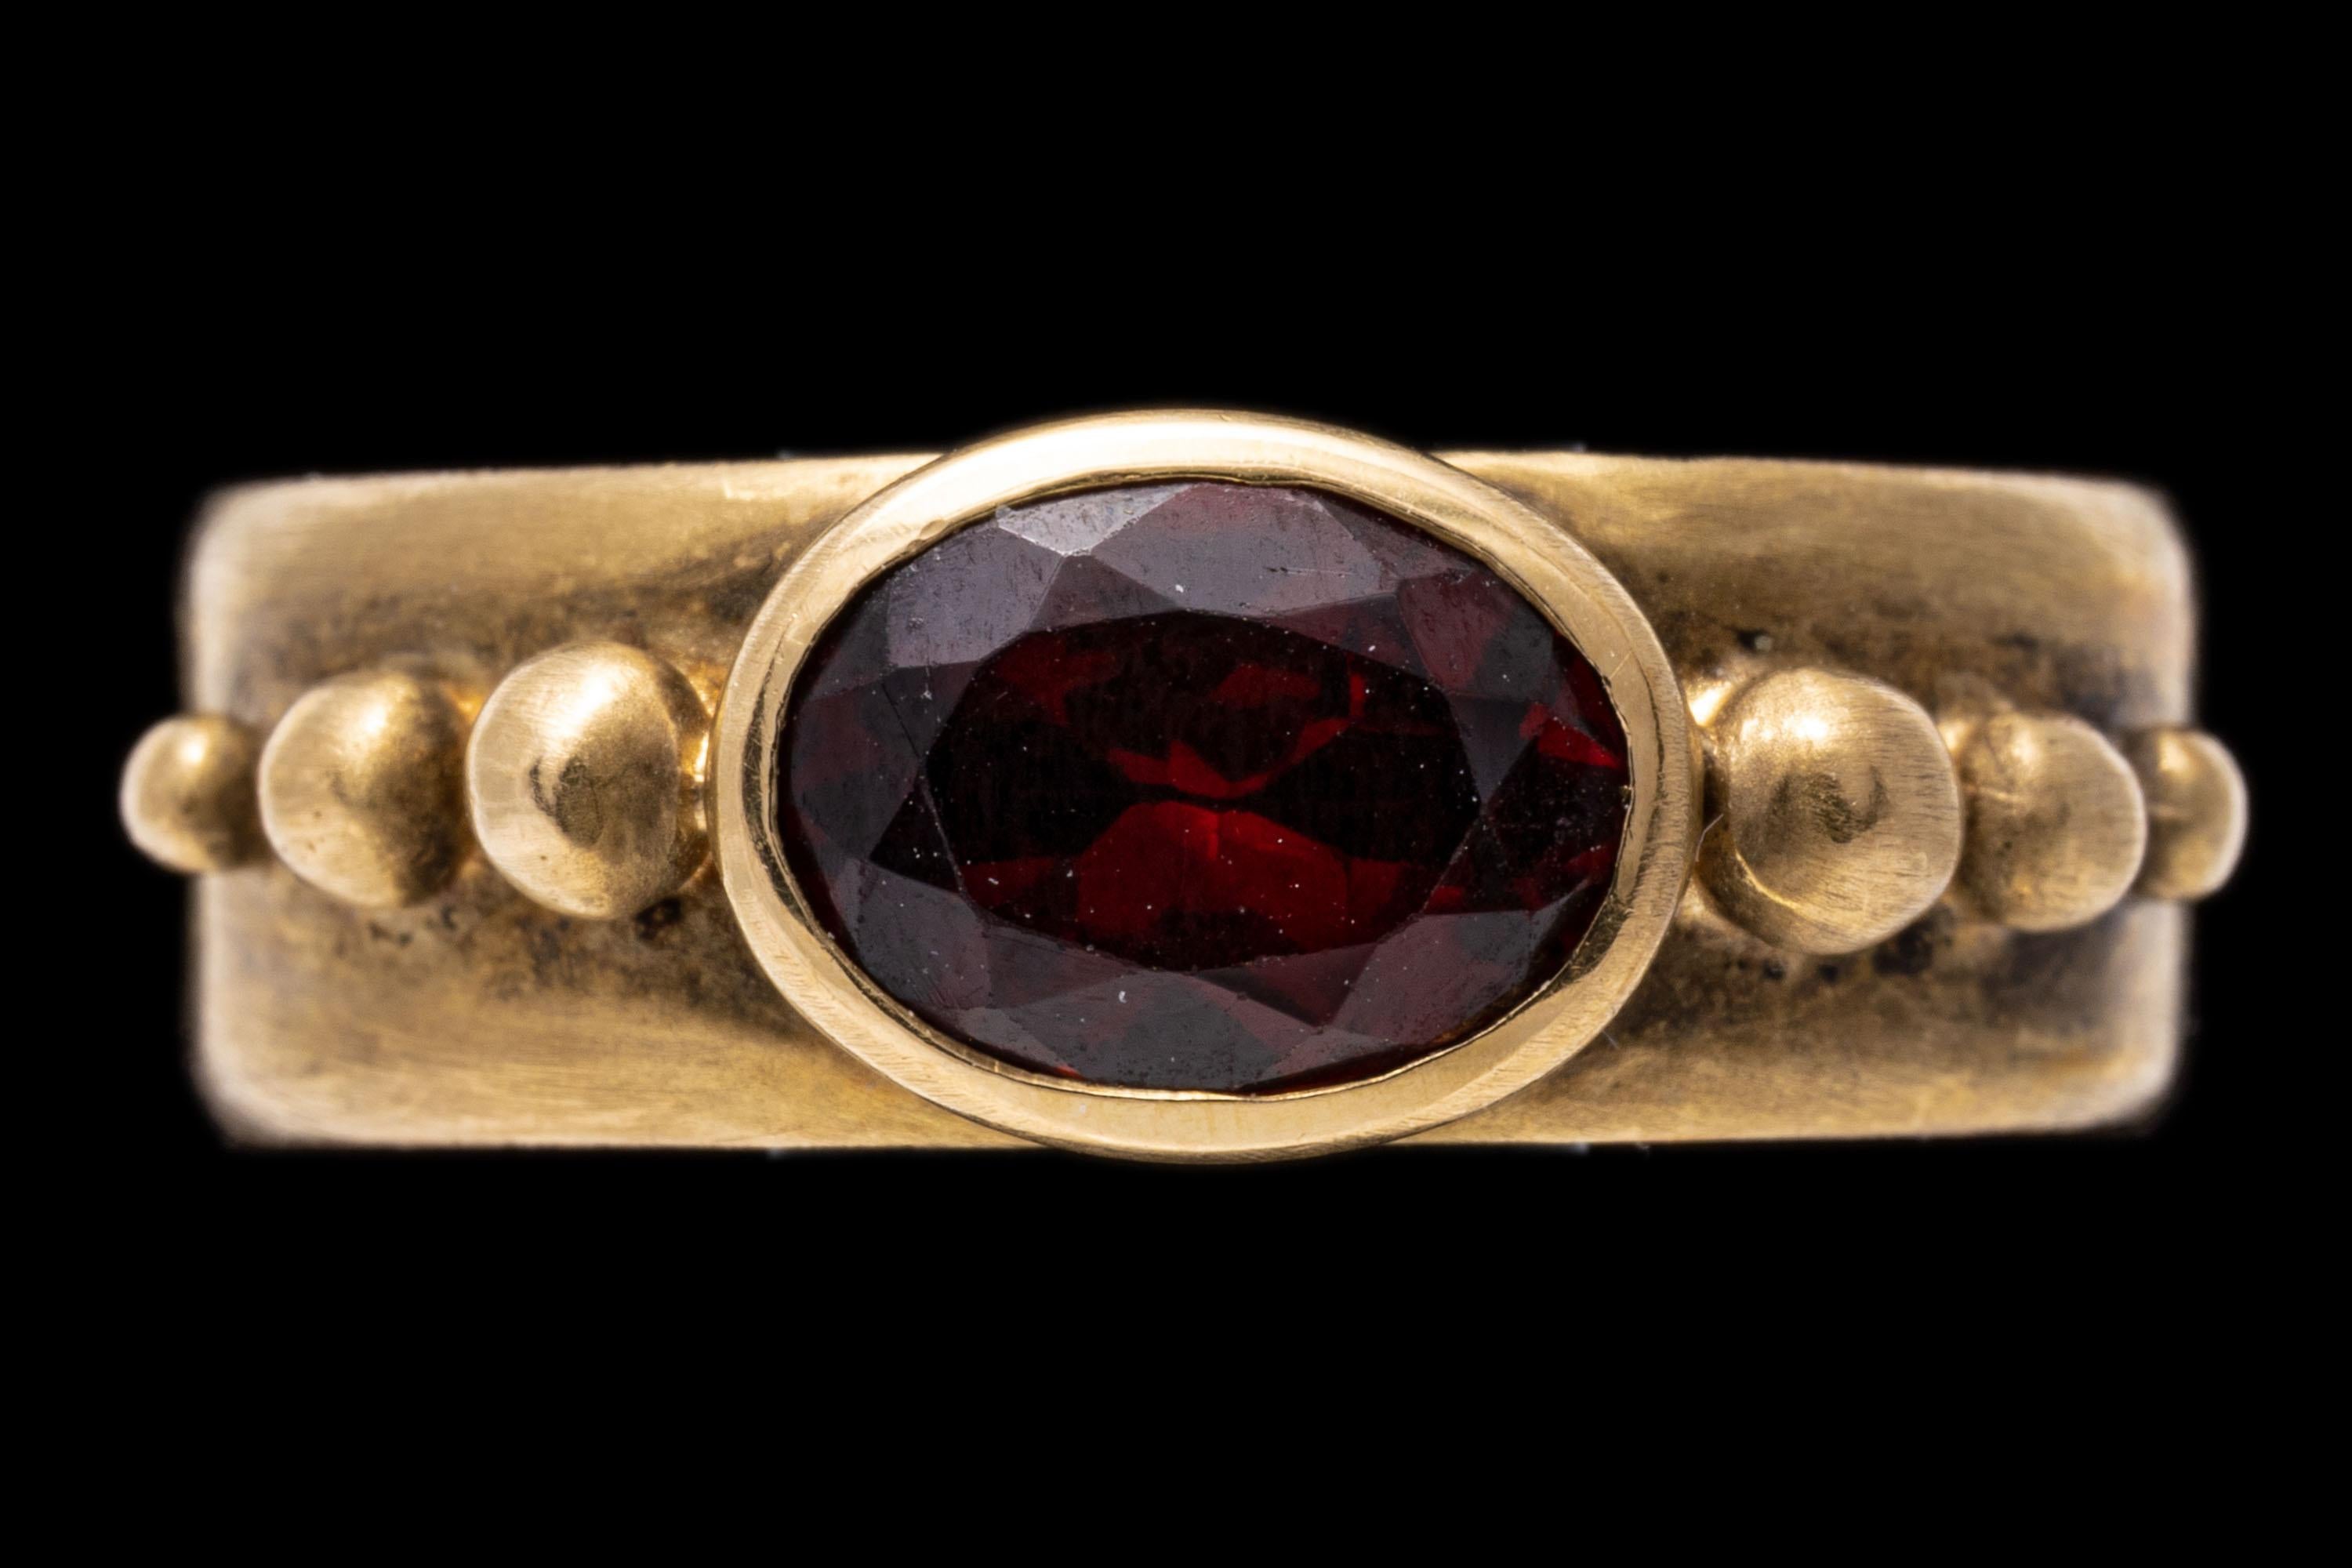 14k yellow gold ring. This stylish ring has a horizontal oval faceted, medium to dark burgundy color garnet, approximately 1.30 CTS and bezel set into a wide, matte burnished band and flanked by graduated ball sides.
Marks: 14k 
Dimensions: 1/4